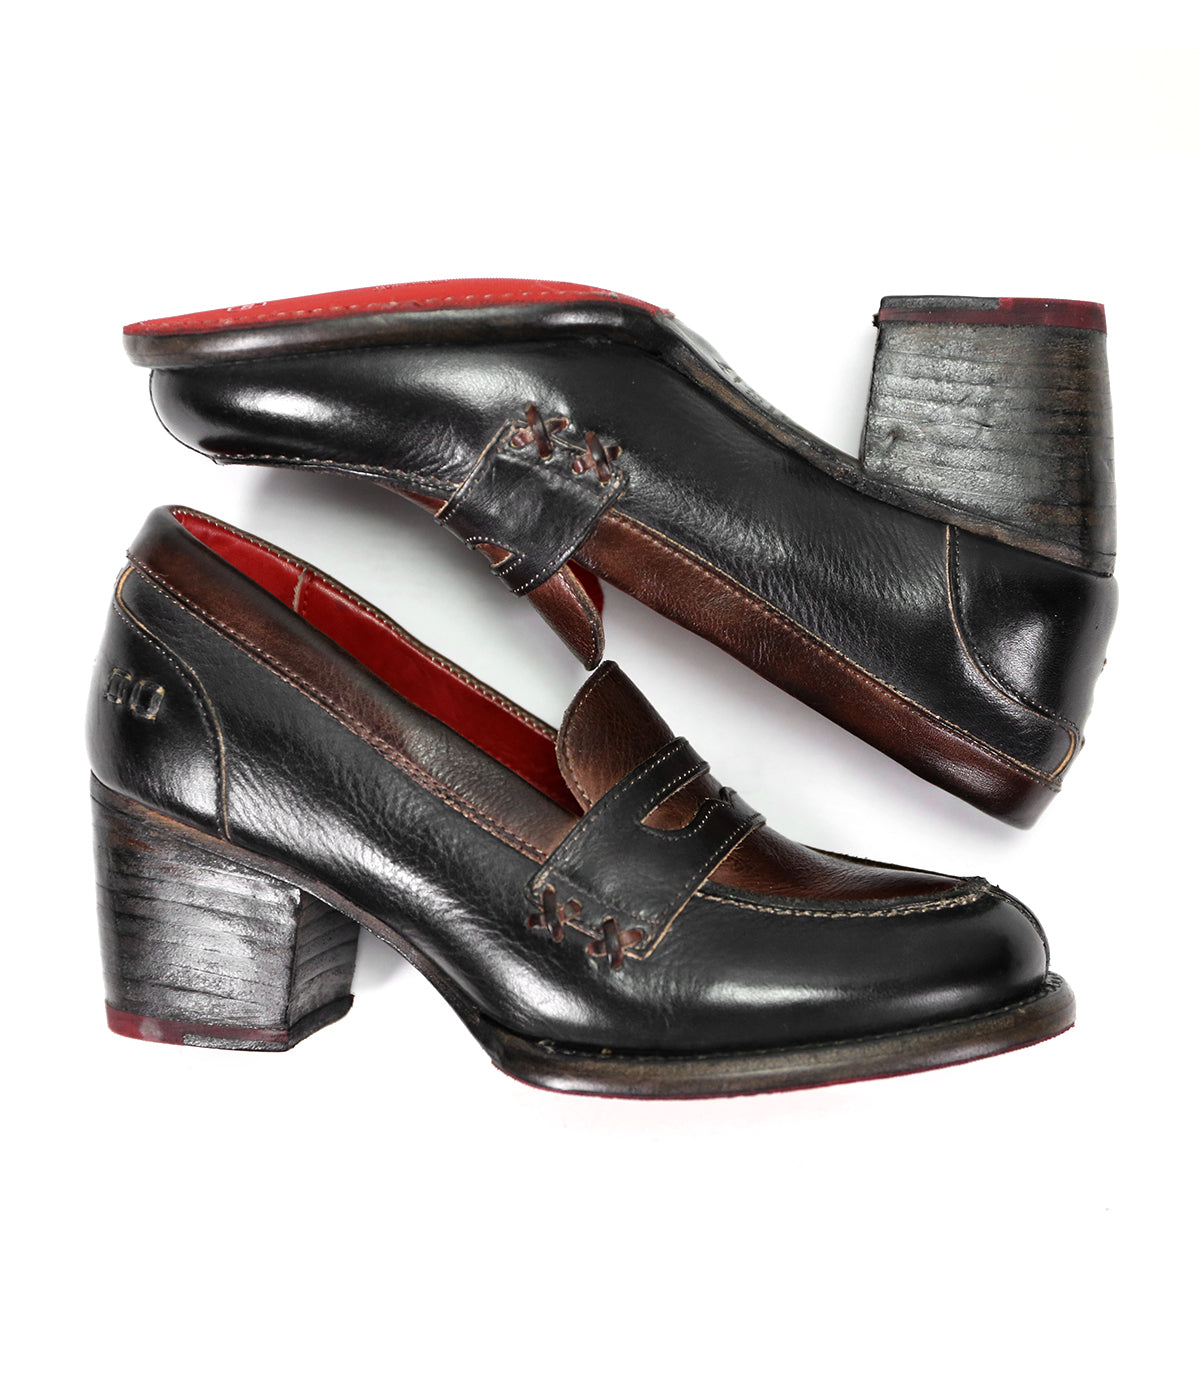 A pair of Bed Stu Liberty loafers with red soles, perfect for office shoe game.